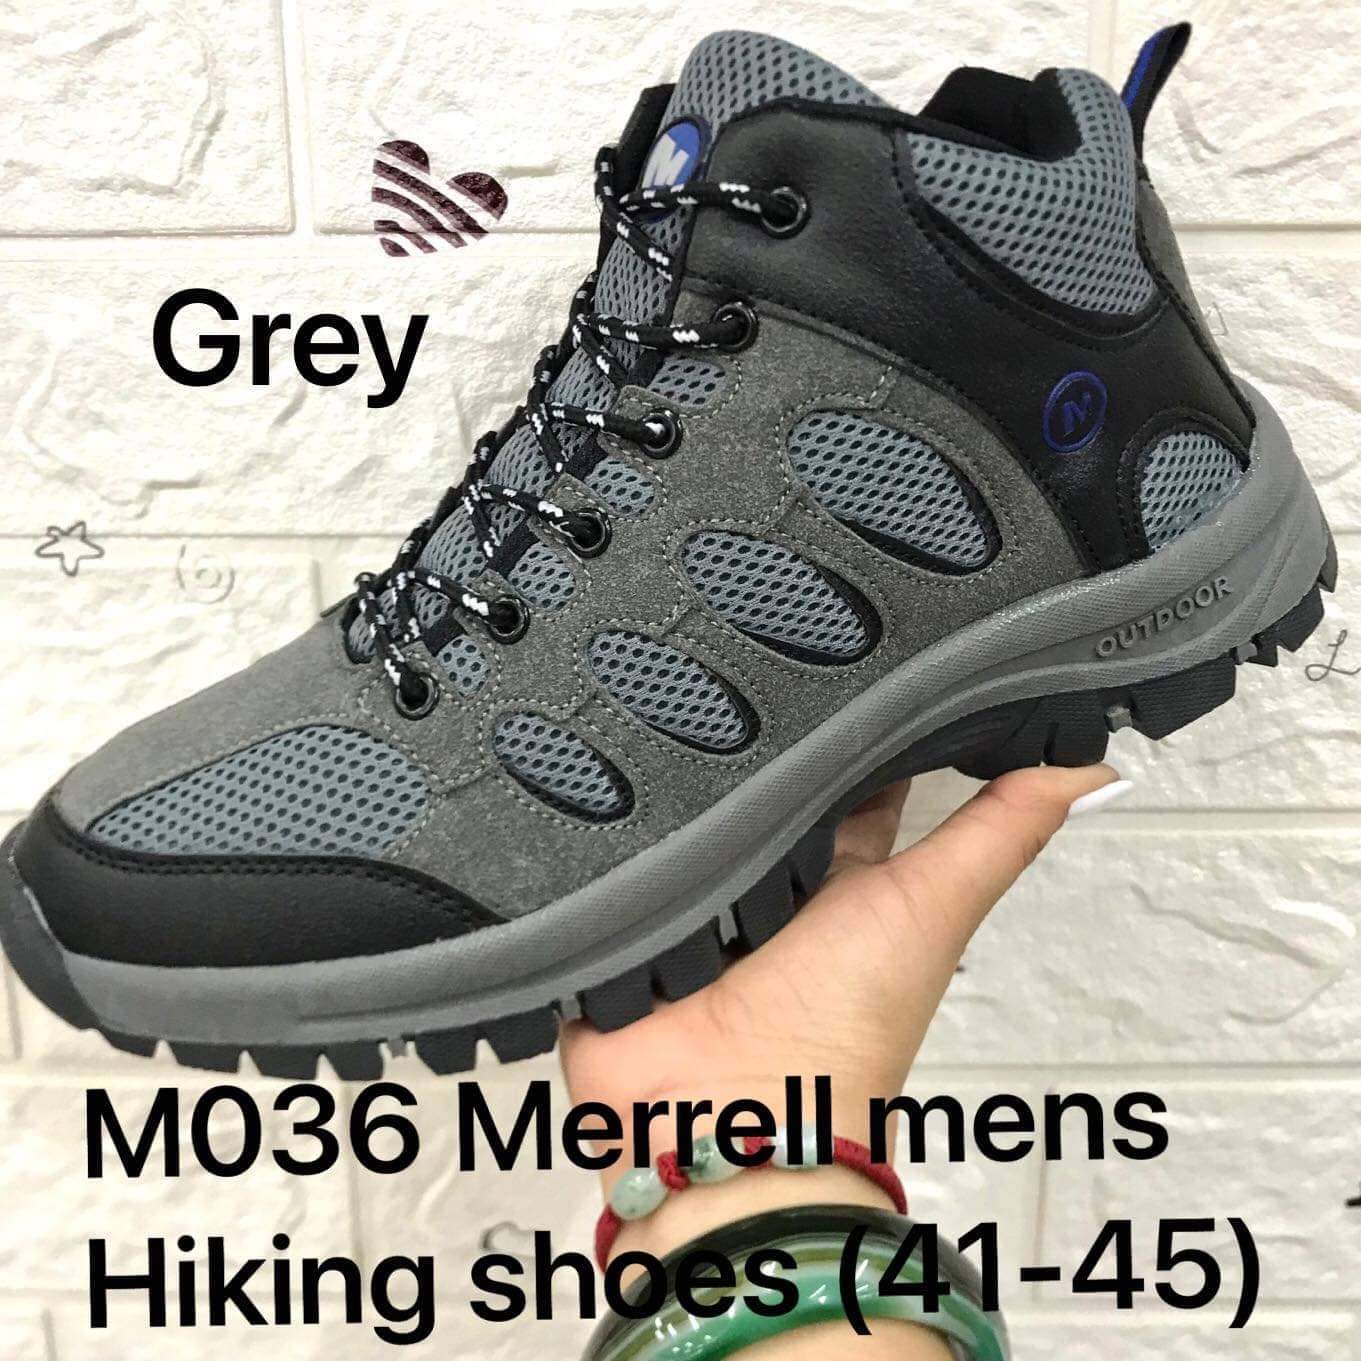 MERRELL SAFETY SHOES STEEL TOE | Lazada PH